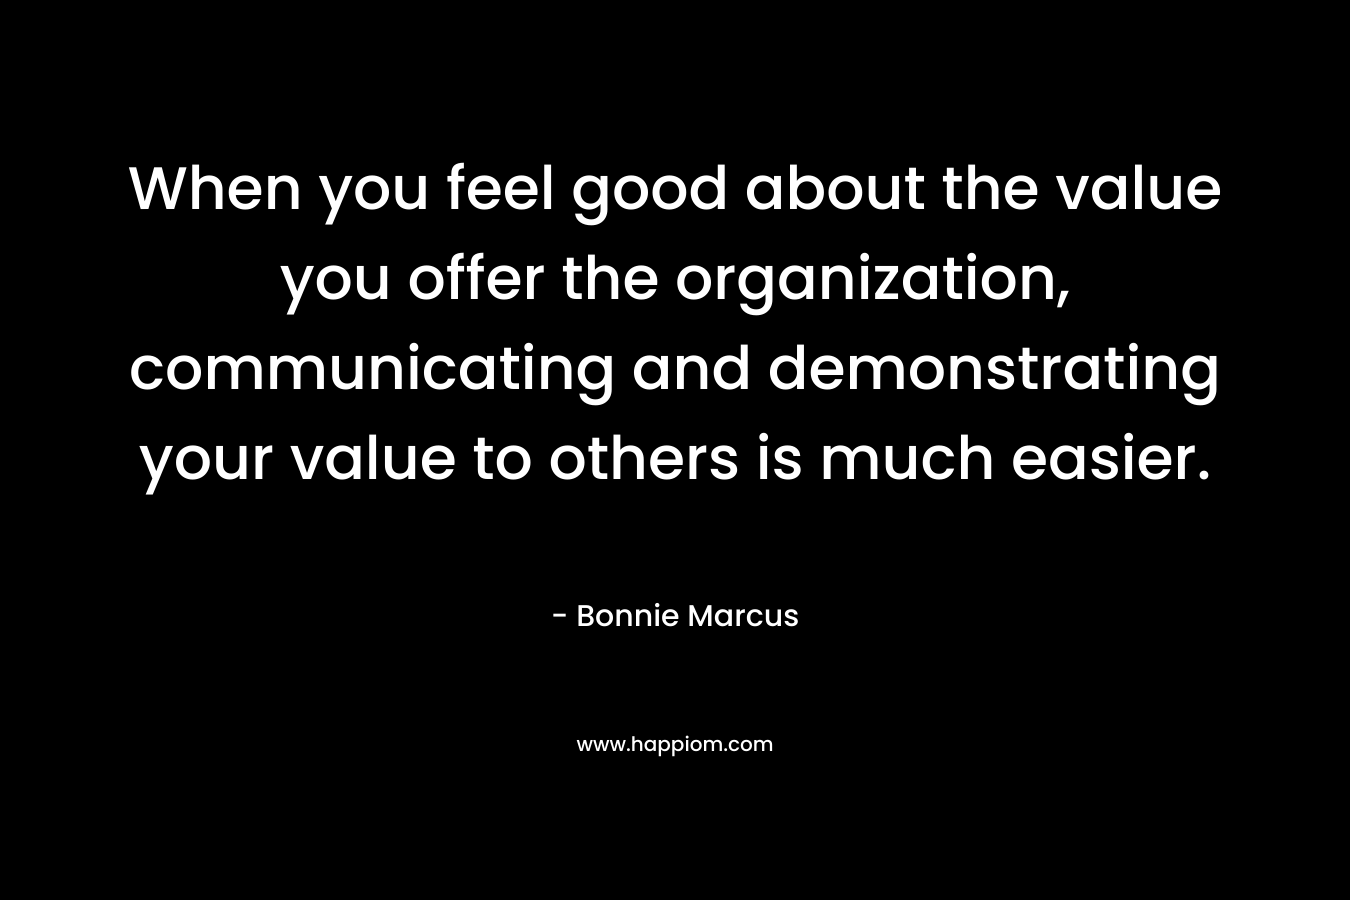 When you feel good about the value you offer the organization, communicating and demonstrating your value to others is much easier.